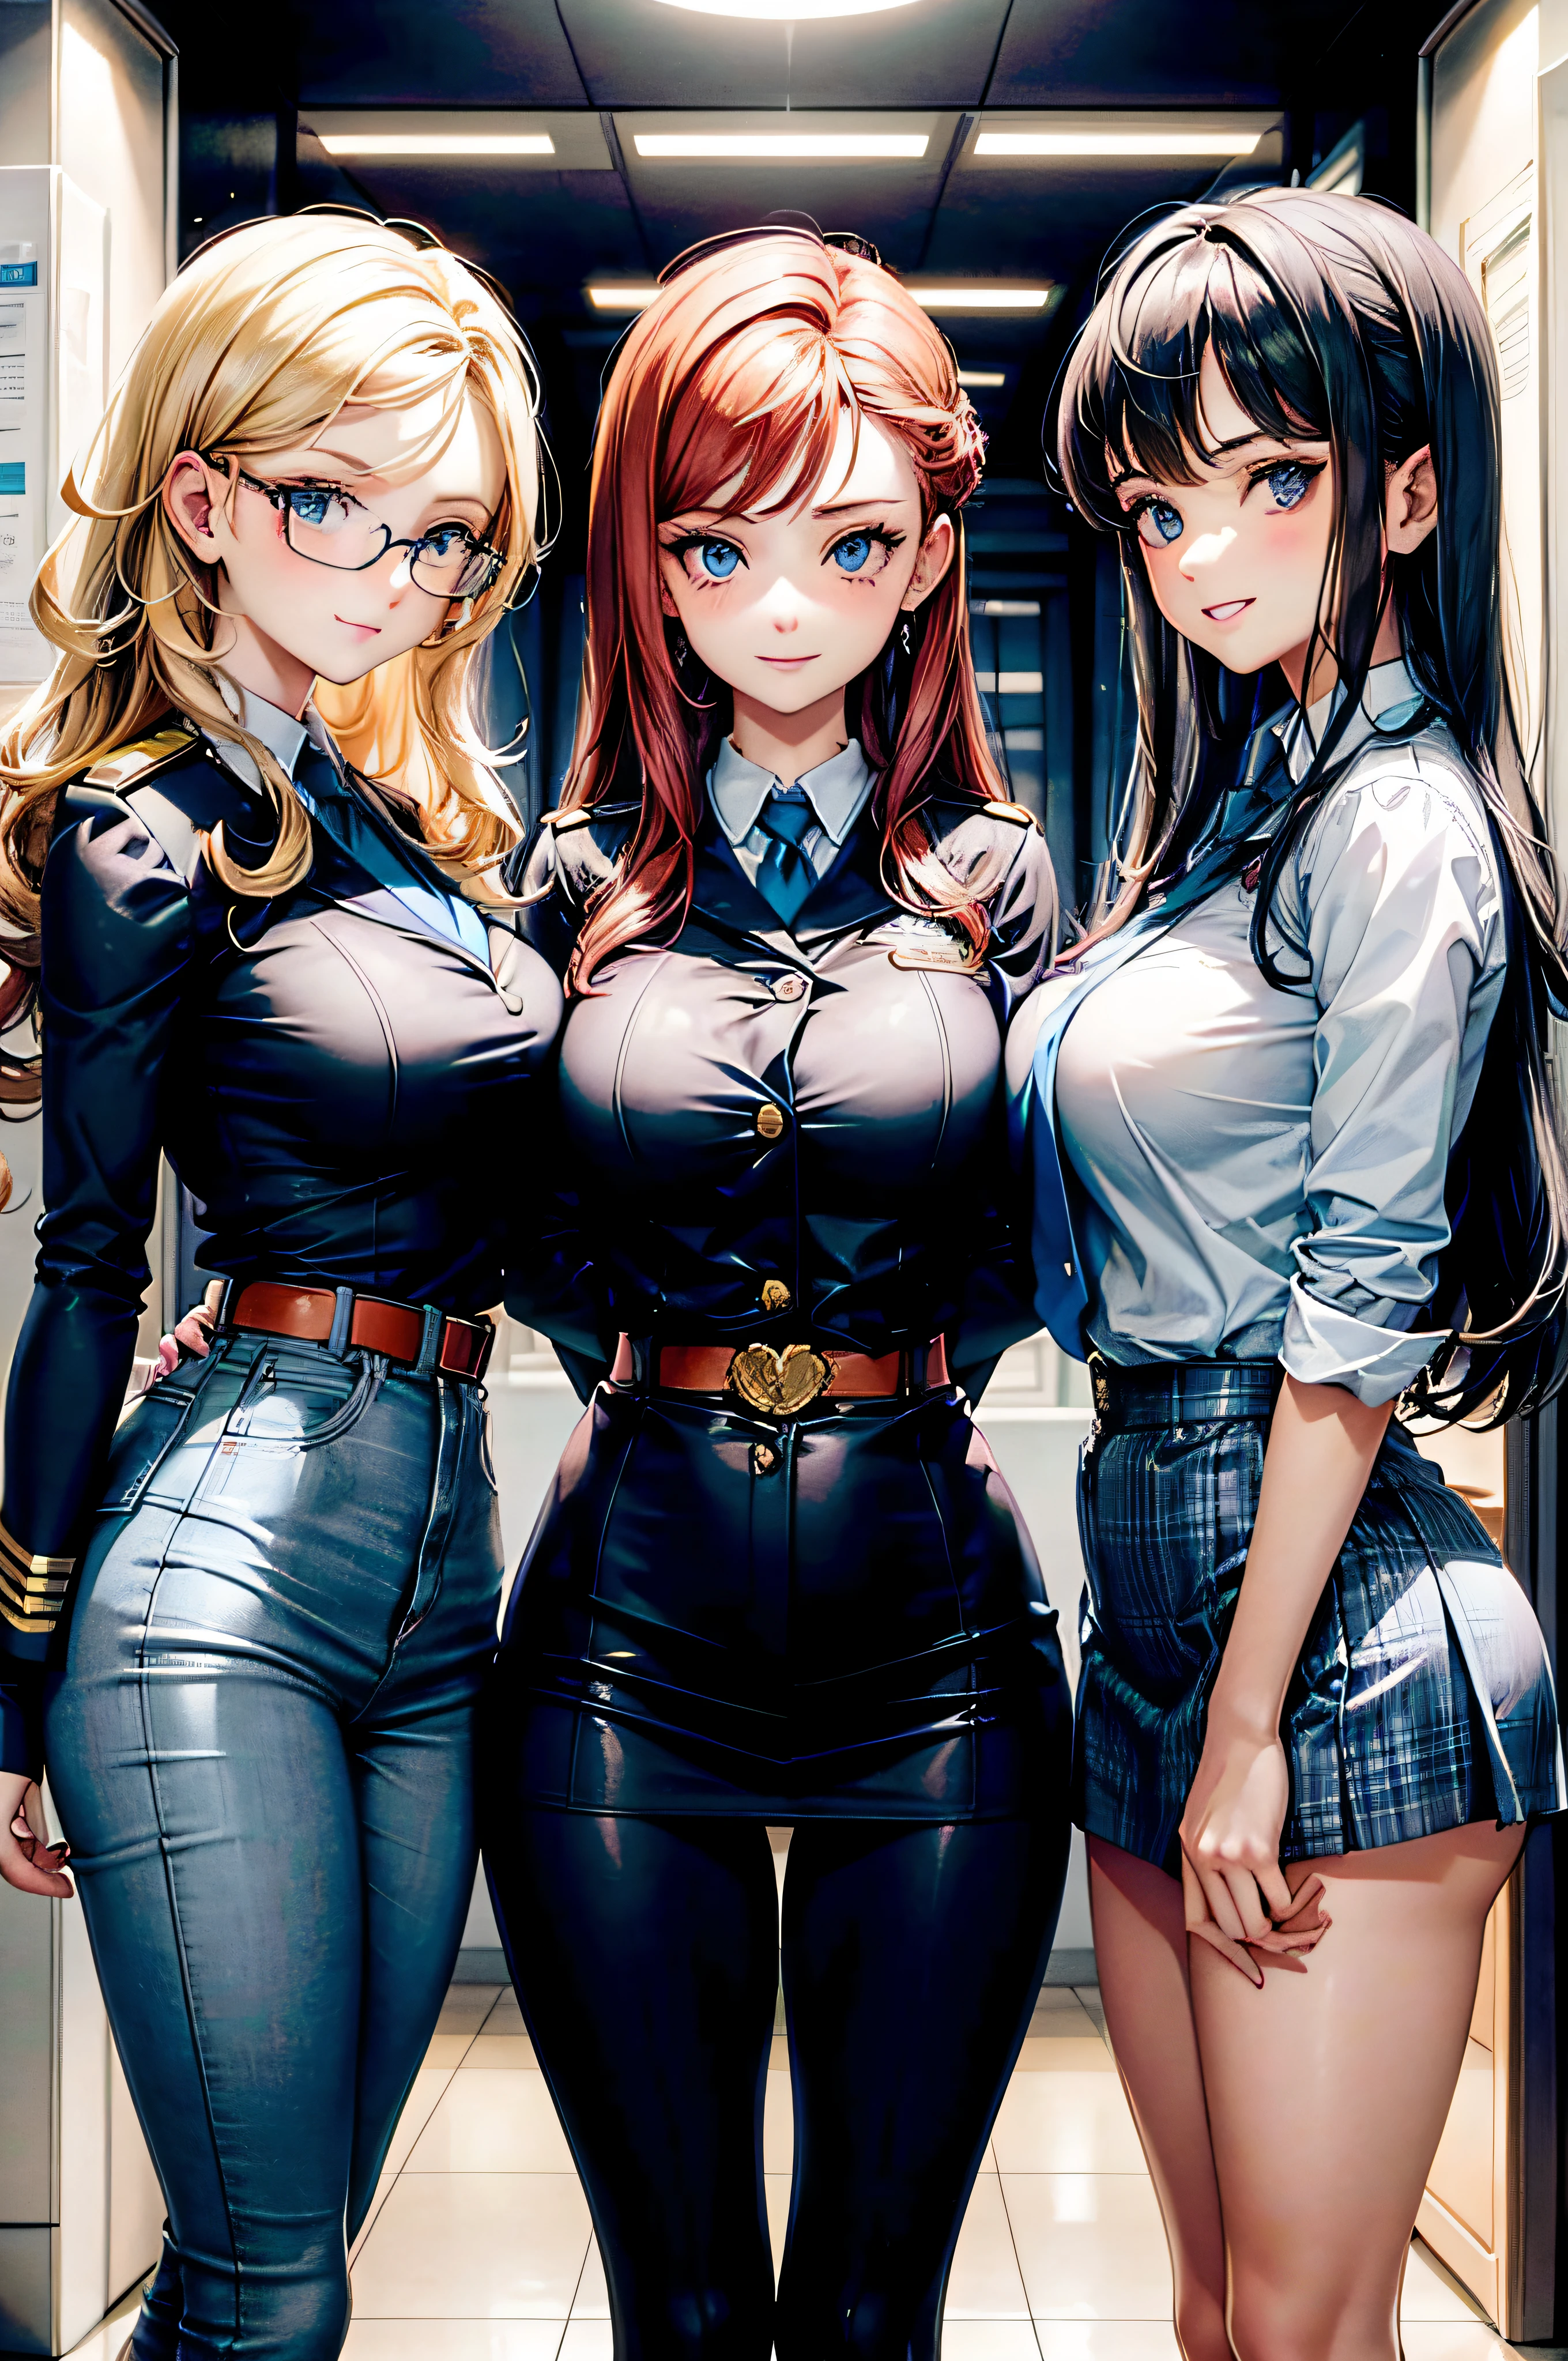 draw three different girls, the first is brunette with curls and blue eyes, the one in the middle is a beautiful blonde with wide eyes and the third from the right is a redhead with fair skin and blue eyes., the three are wearing student uniforms and looking at the viewer with a mischievous look, com mais uniforme estudantil, full of details and all three wearing glasses, sorrir maliciosamente para o telespectador, Ultra resolution, sobrancelhas franzidas e sorriso malicioso